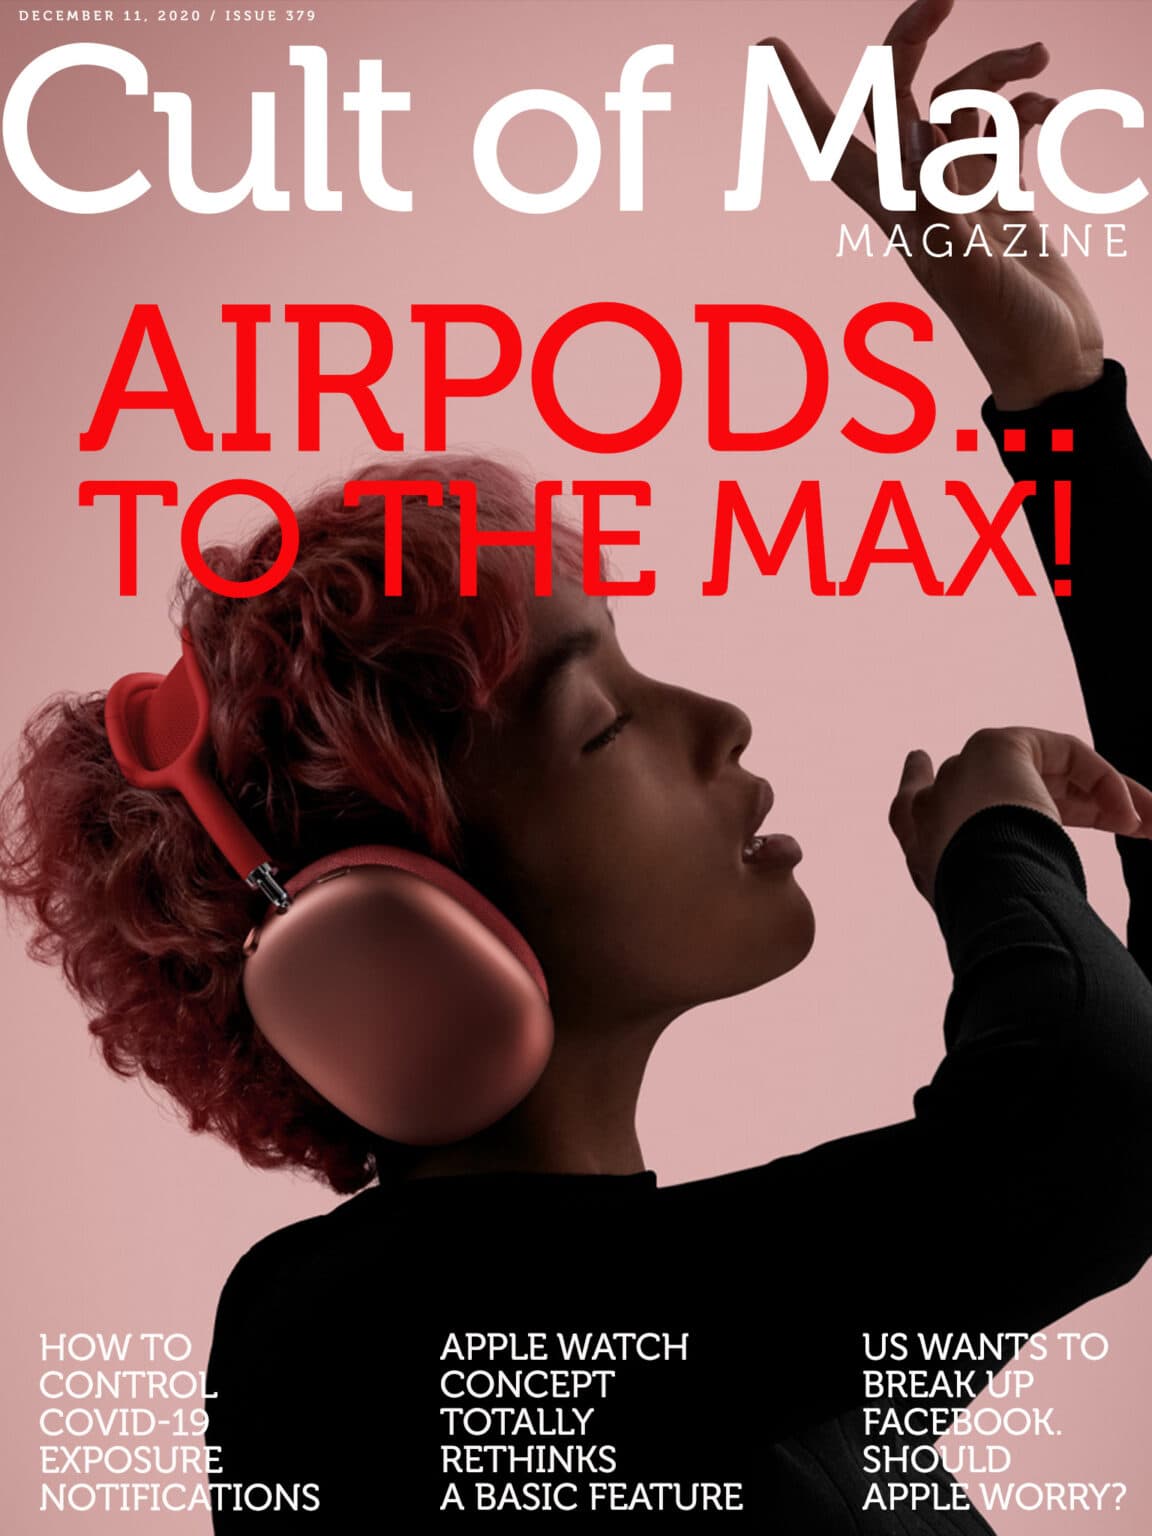 AirPods Max: Apple takes AirPods to the Max!